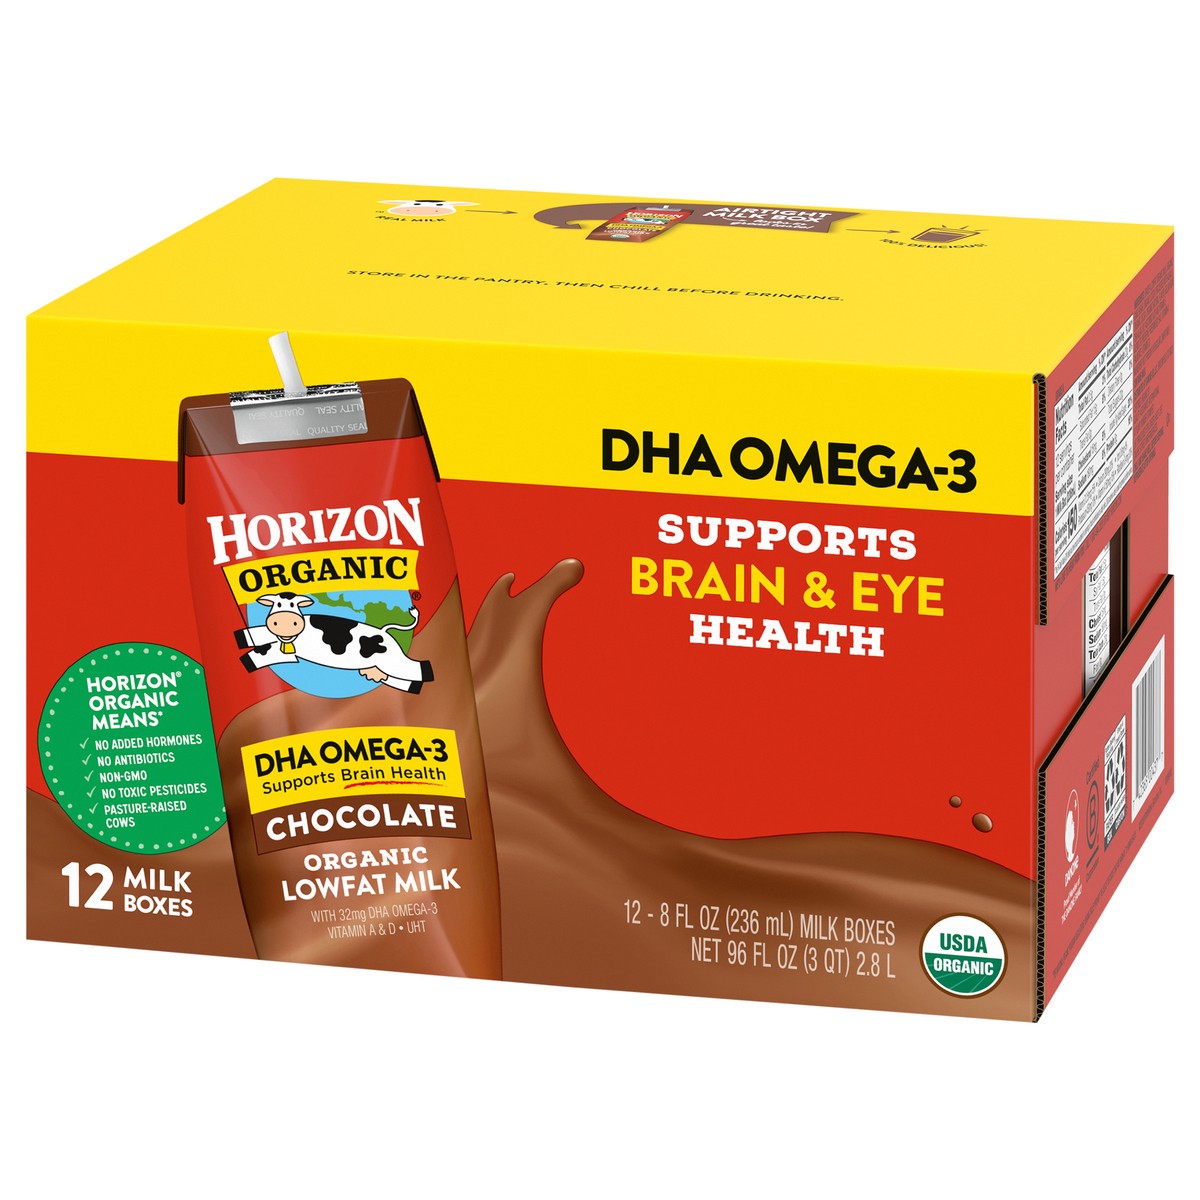 slide 2 of 12, Horizon Organic Shelf-Stable 1% Low Fat milk Boxes with DHA Omega-3, Chocolate, 8 oz., 12 Pack, 8 fl oz